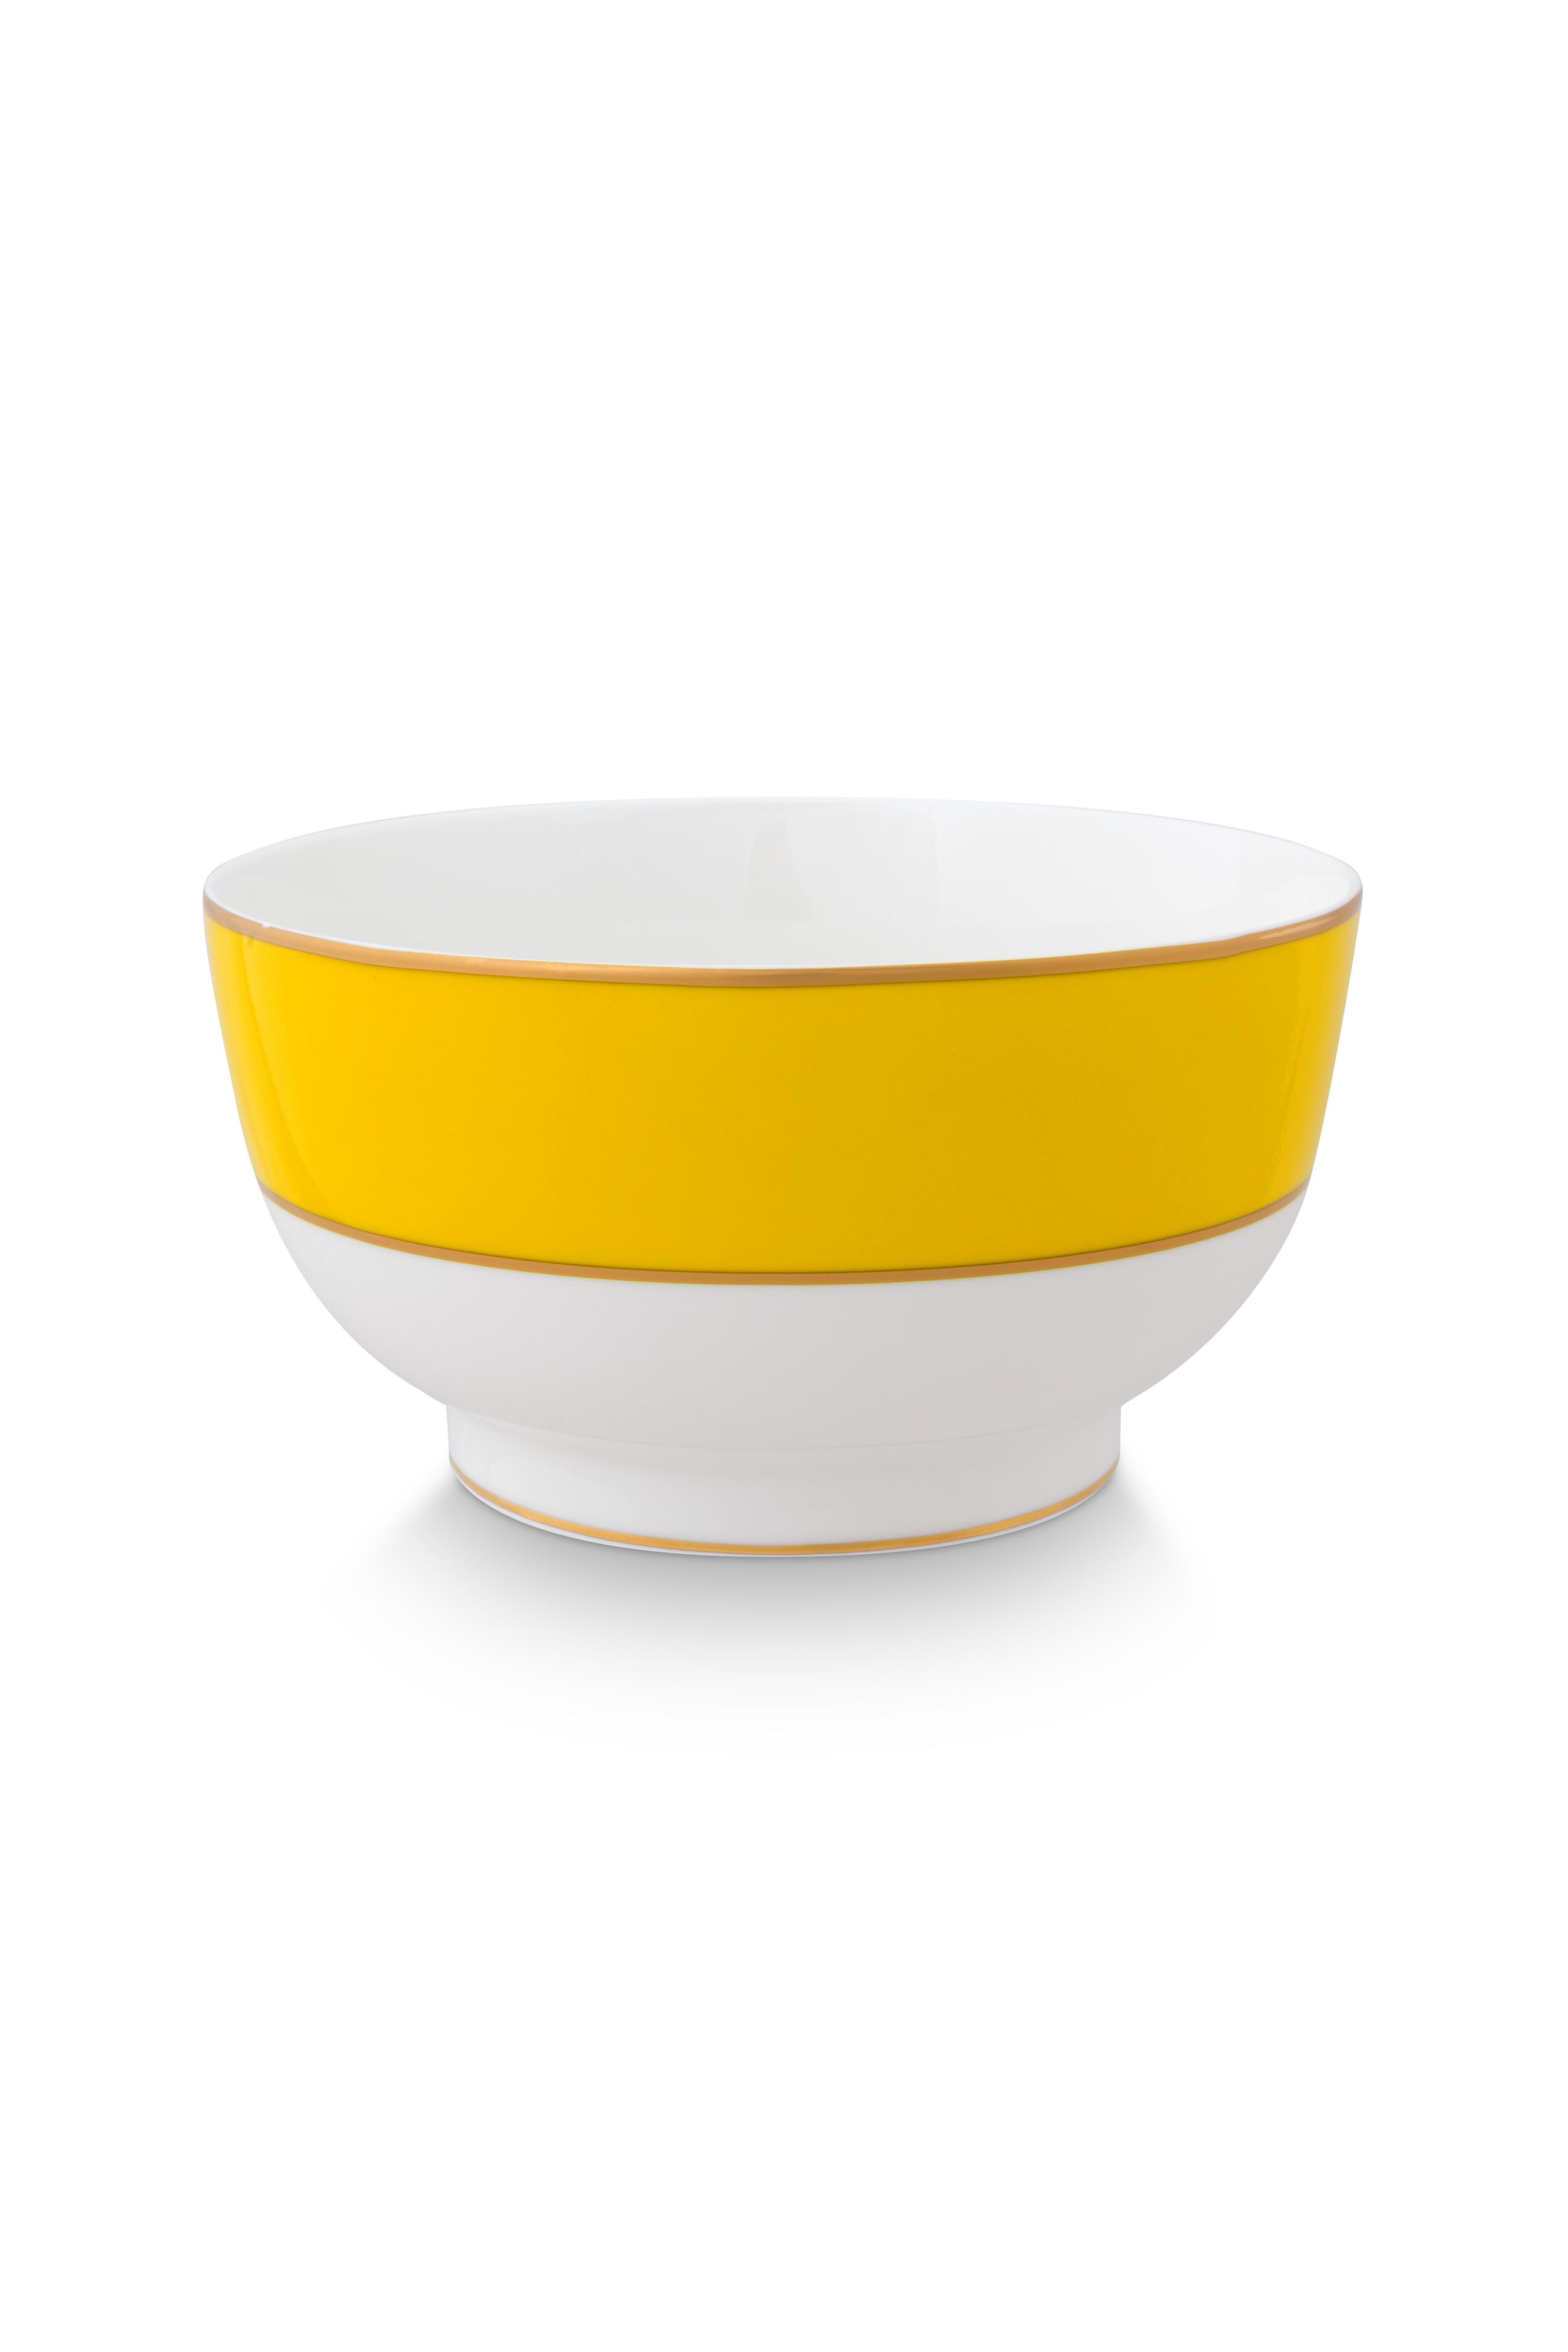 Bowl Pip Chique Gold-yellow 20.5cm Gift